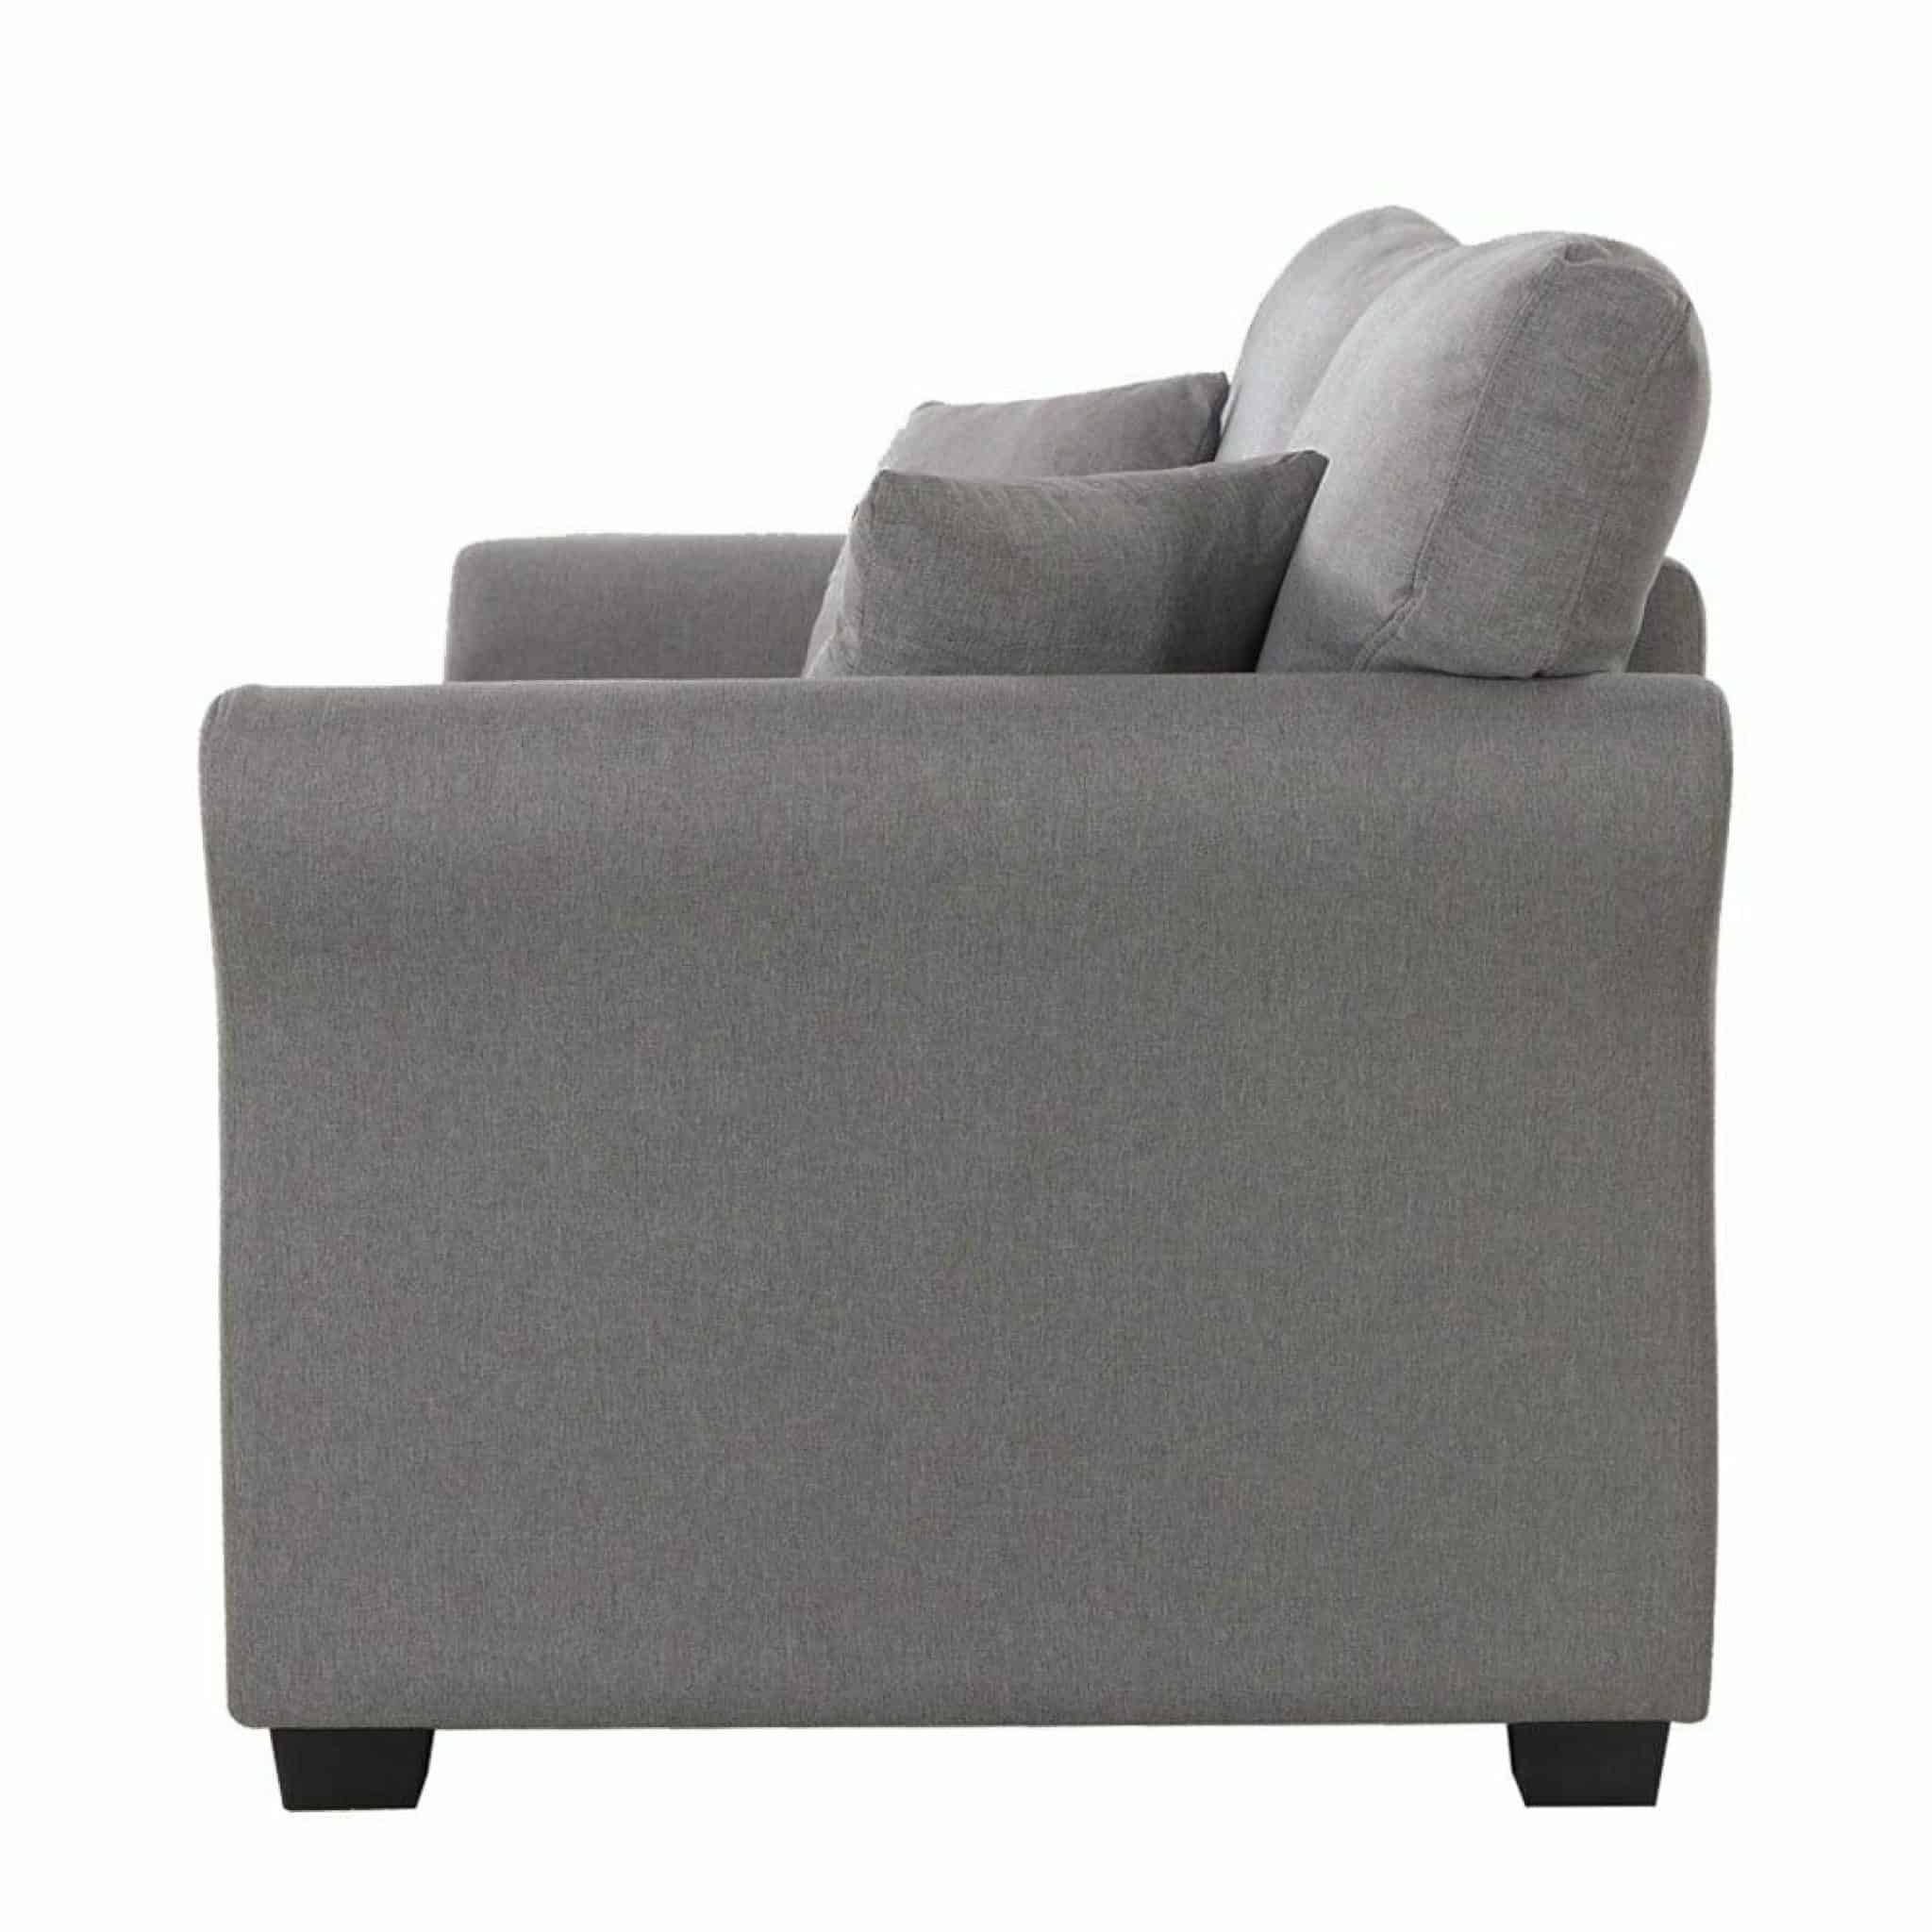 63" Bluish Grey Cozy Loveseat Sofa W/ 2 Accent Pillows – Affordable Pertaining To Sofas In Bluish Grey (View 11 of 20)